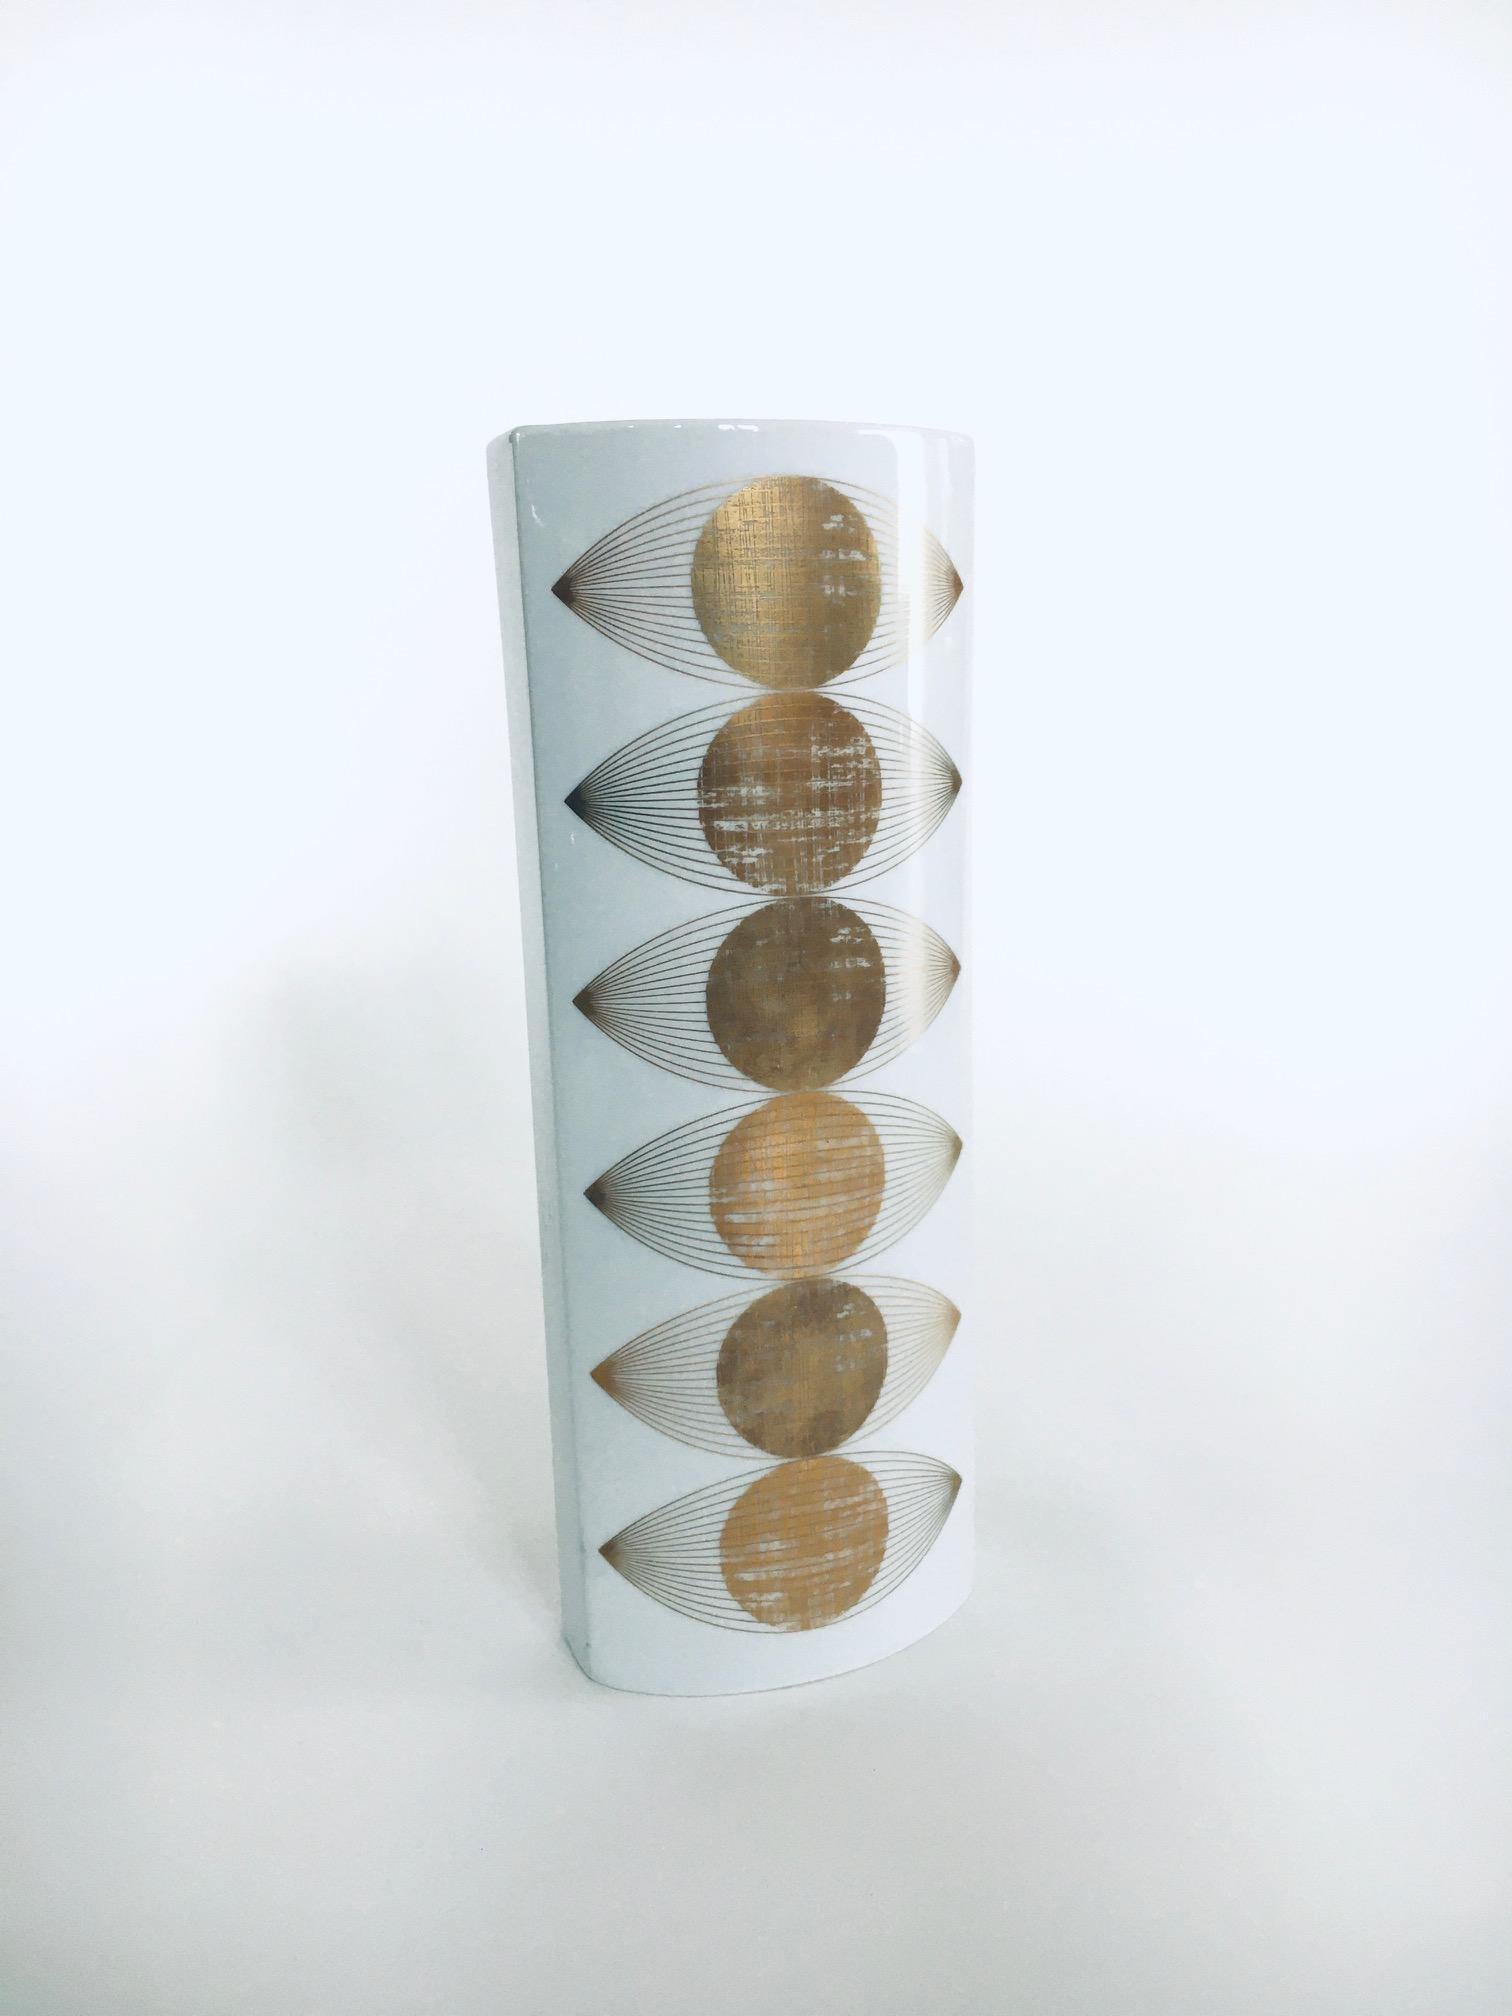 Vintage Op Art Porcelain Vase by E.A. Sundermann for Fürstenberg. Made in Germany 1960's / 70's period. White porcelain with gold sun eye print front and back. This comes in very good condition. Measures 32cm x 12cm x 7,5cm.